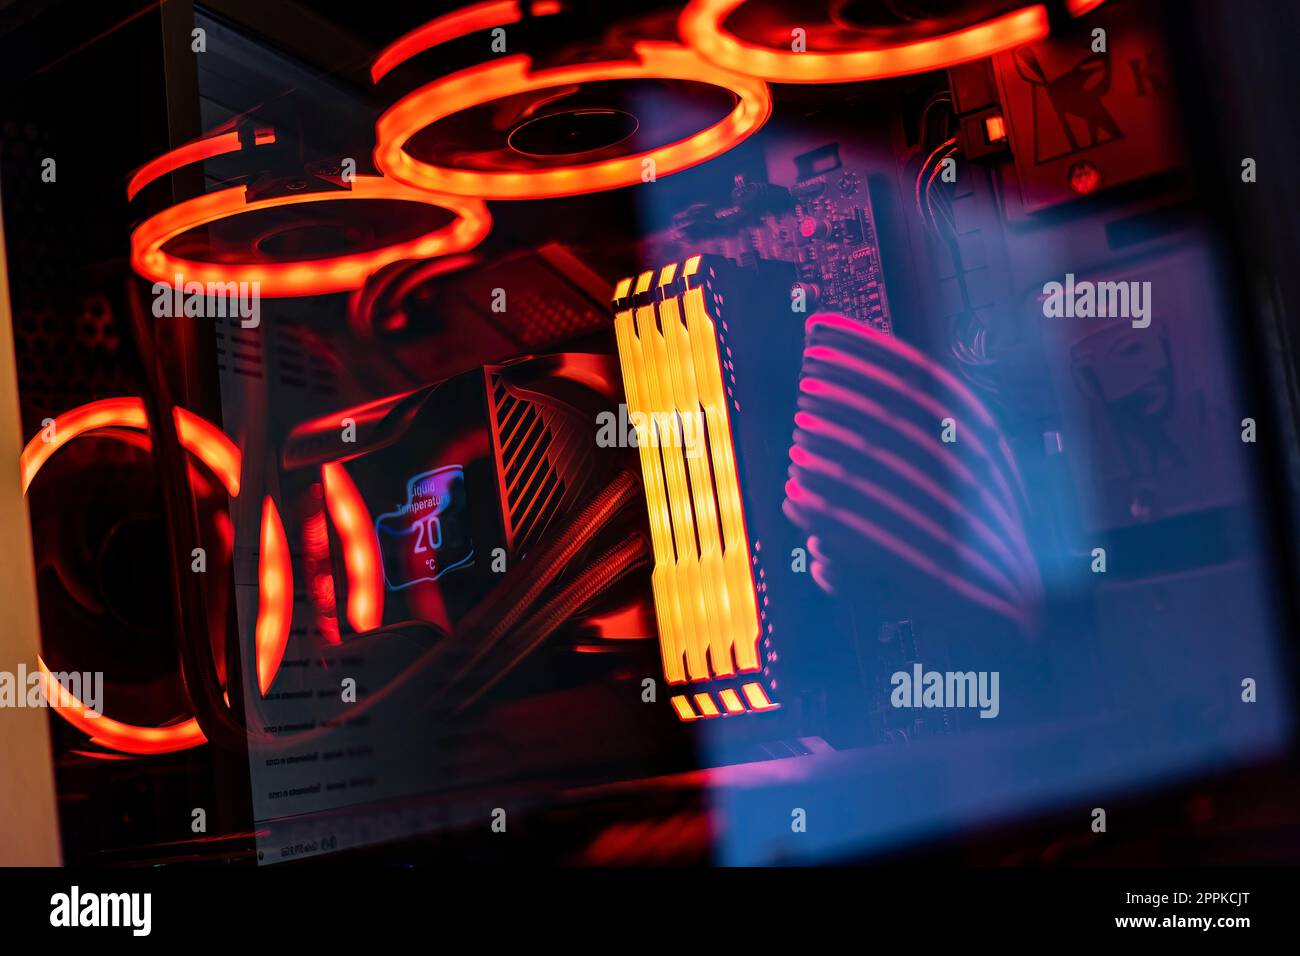 RGB Gaming PC Components Stock Photo